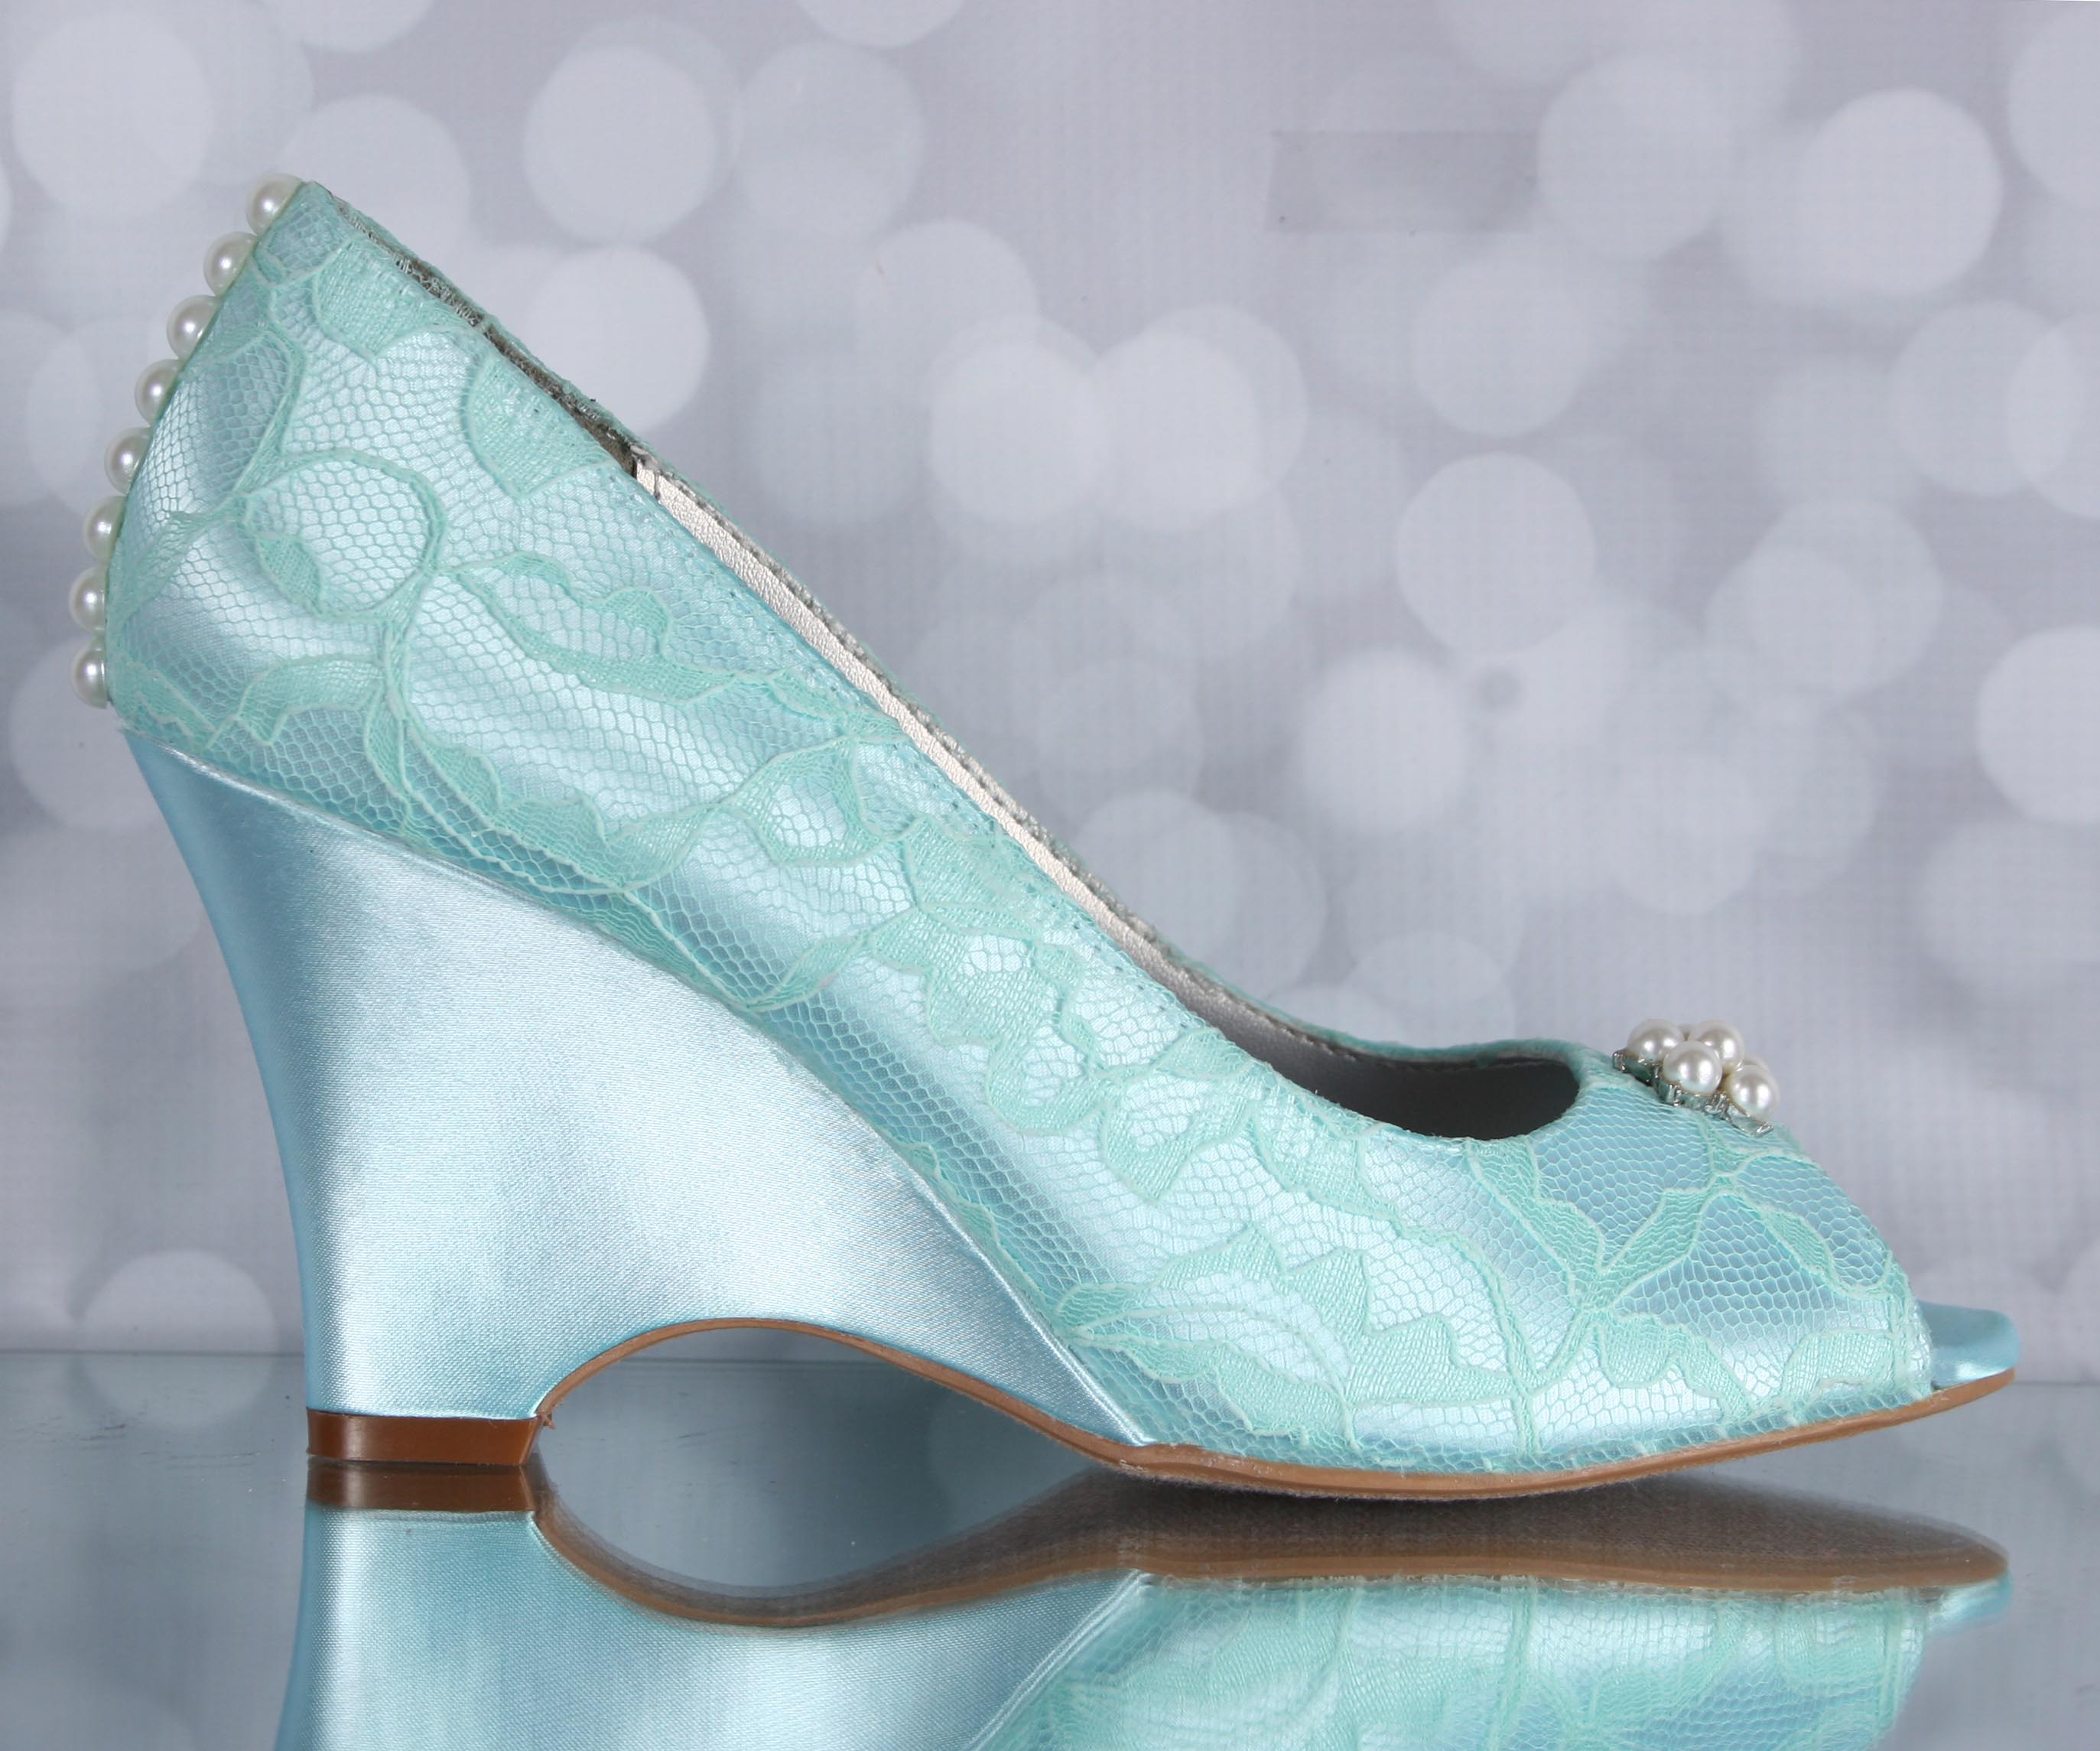 teal wedges for wedding